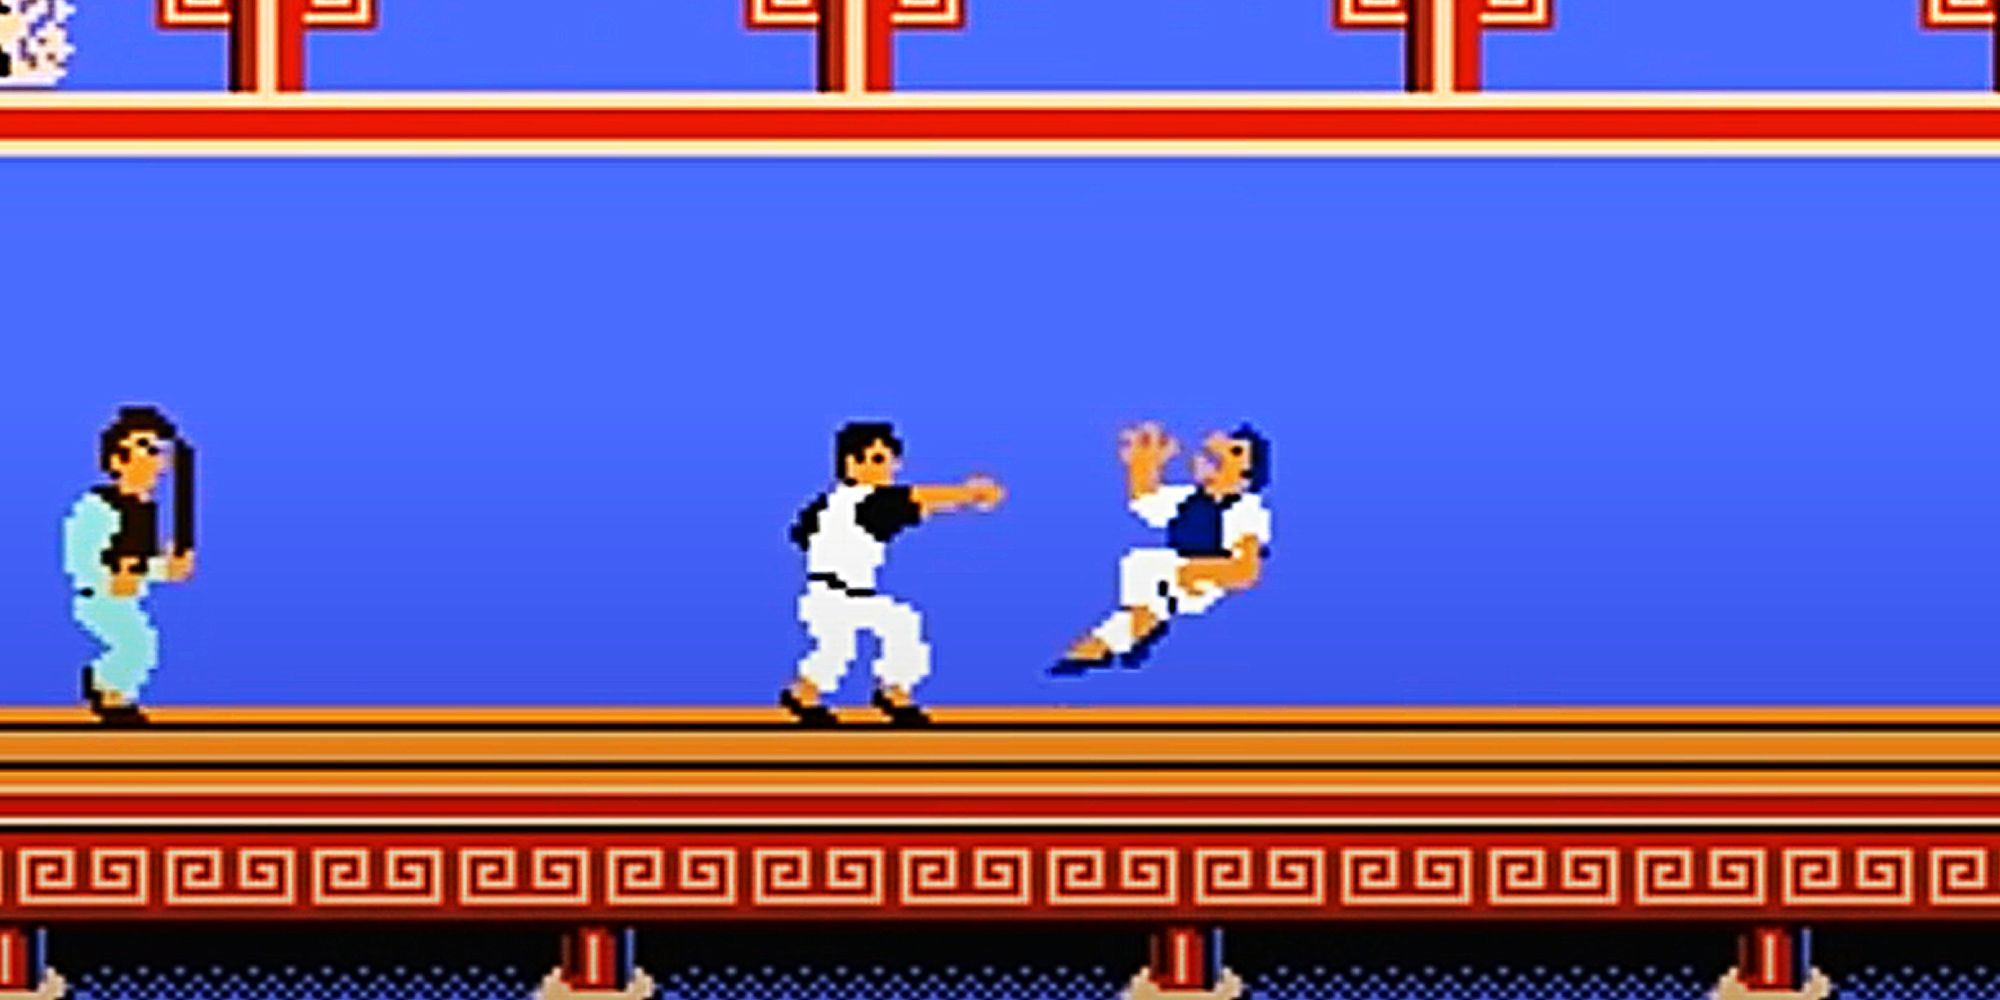 Kung Fu Player Punching An Enemy